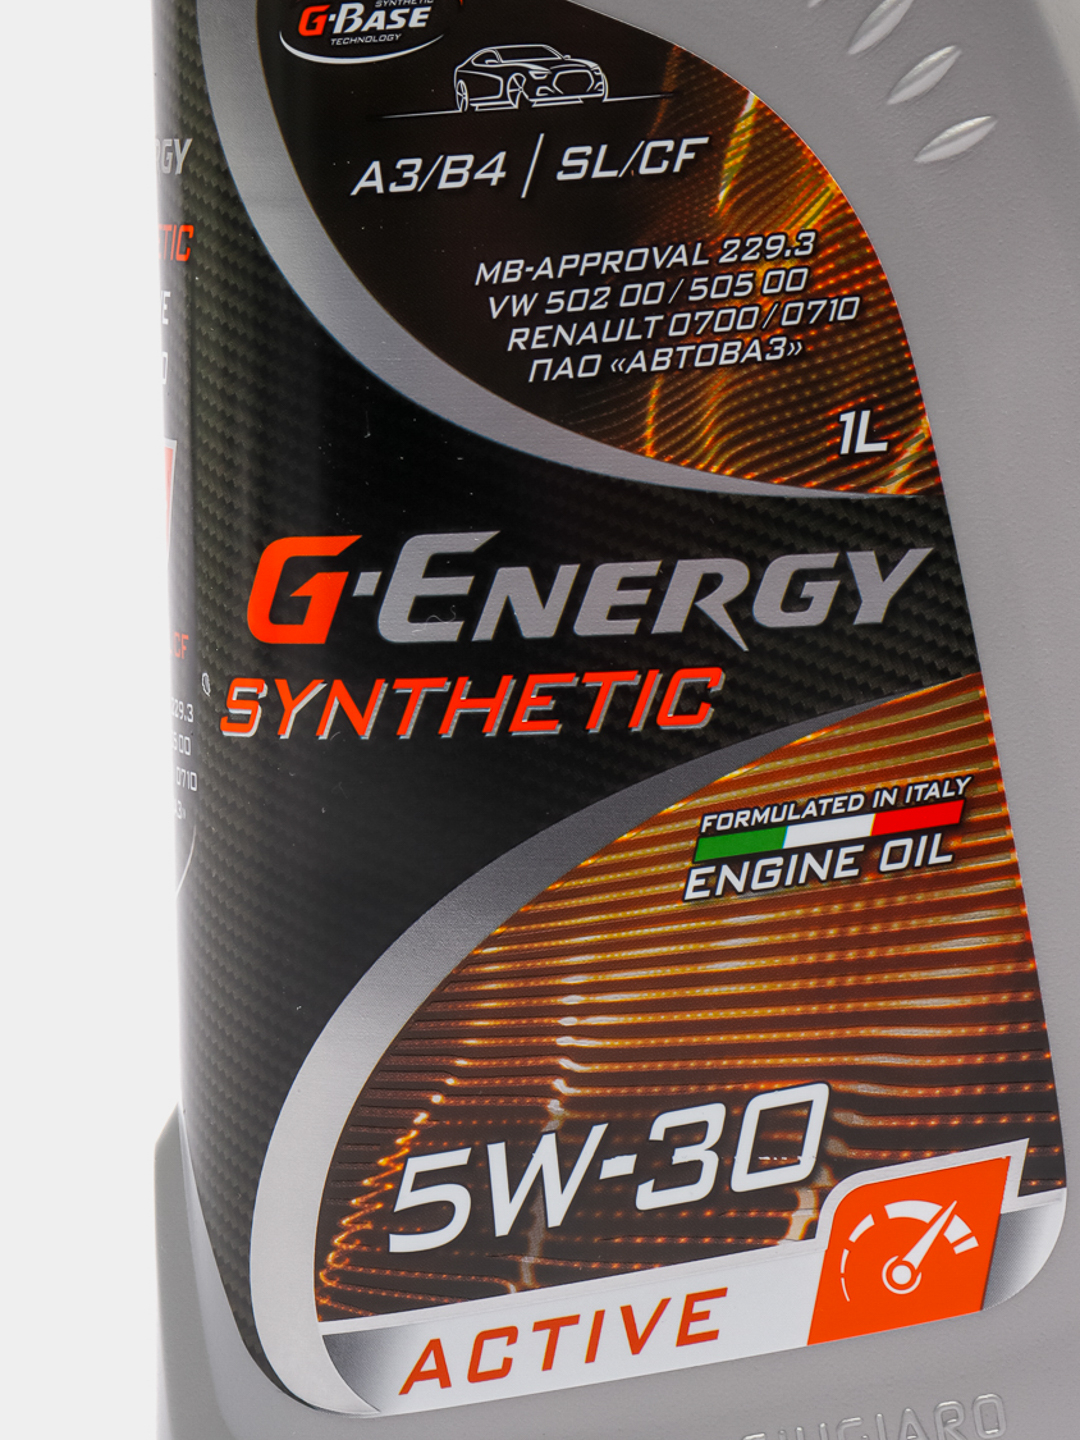 G-Energy Synthetic Active 5w-40. G-Energy Synthetic Active 5w-30. G Energy 5w40 Active. Лукойл Джи Энерджи 5w40.